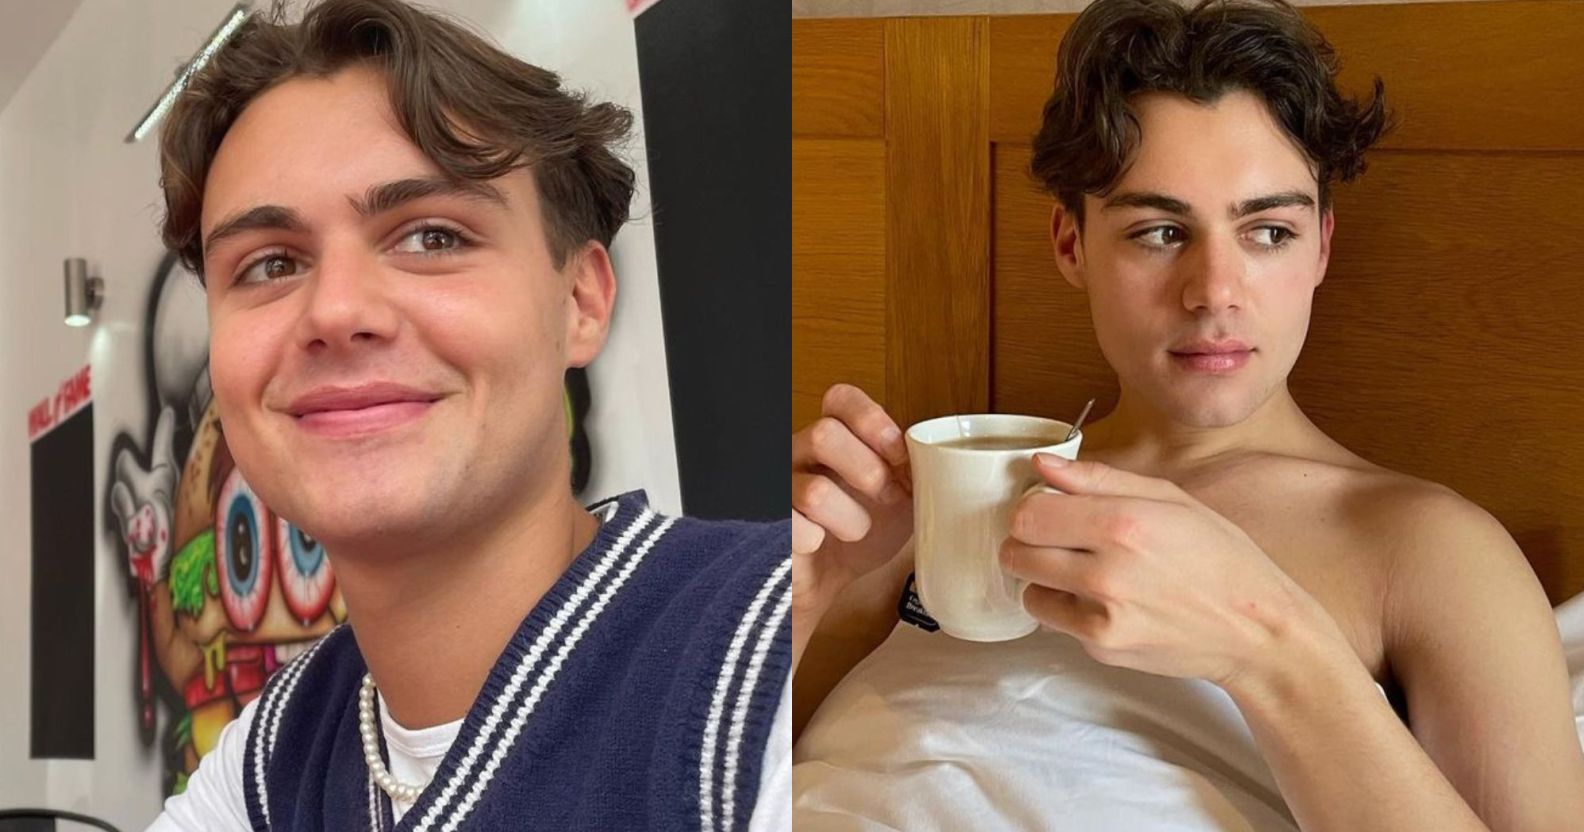 Heartstopper actor Bradley Riches, who plays James McEwan, smiles (left) and sips from a mug in bed (right).